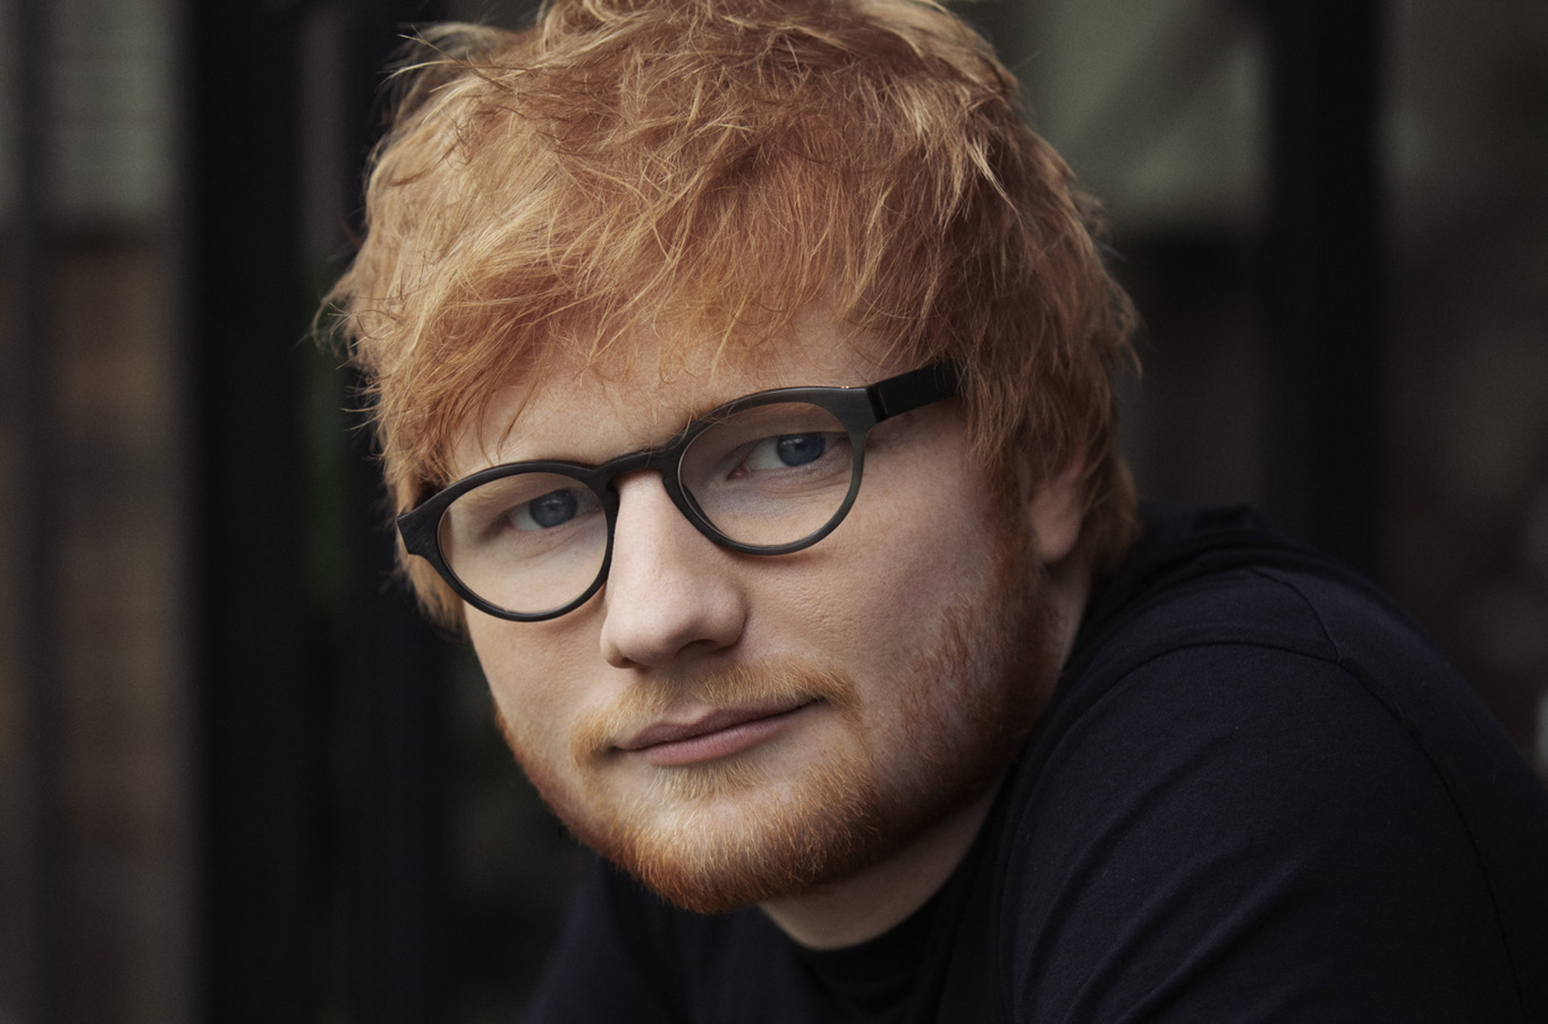 Sziget Festival in Hungary to Sell Signed Memorabilia From Ed Sheeran, Post Malone &amp; More for Charity - www.billboard.com - Hungary